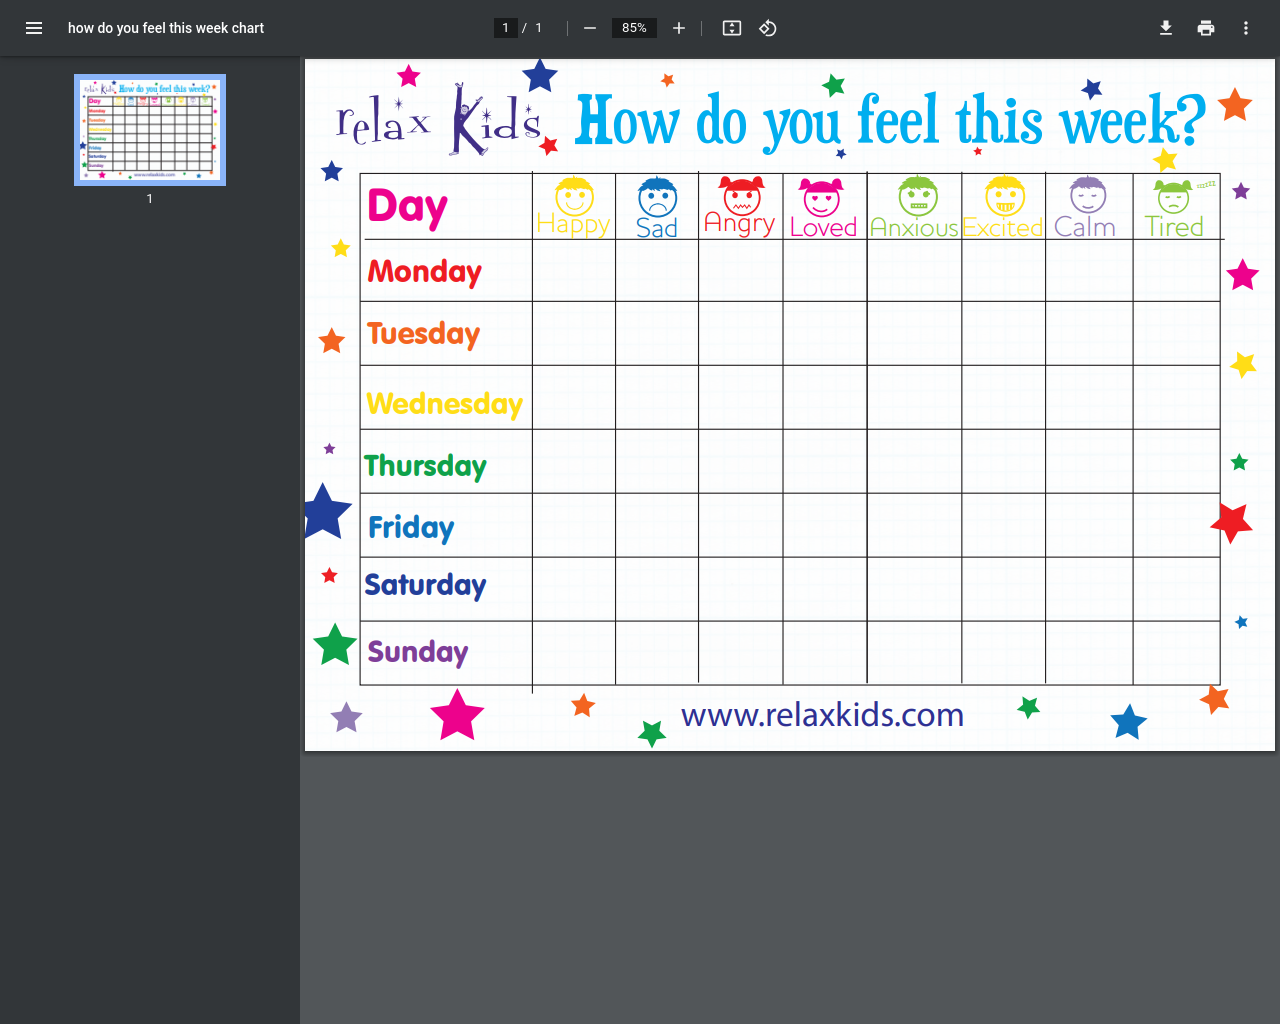 How do you feel this week Chart